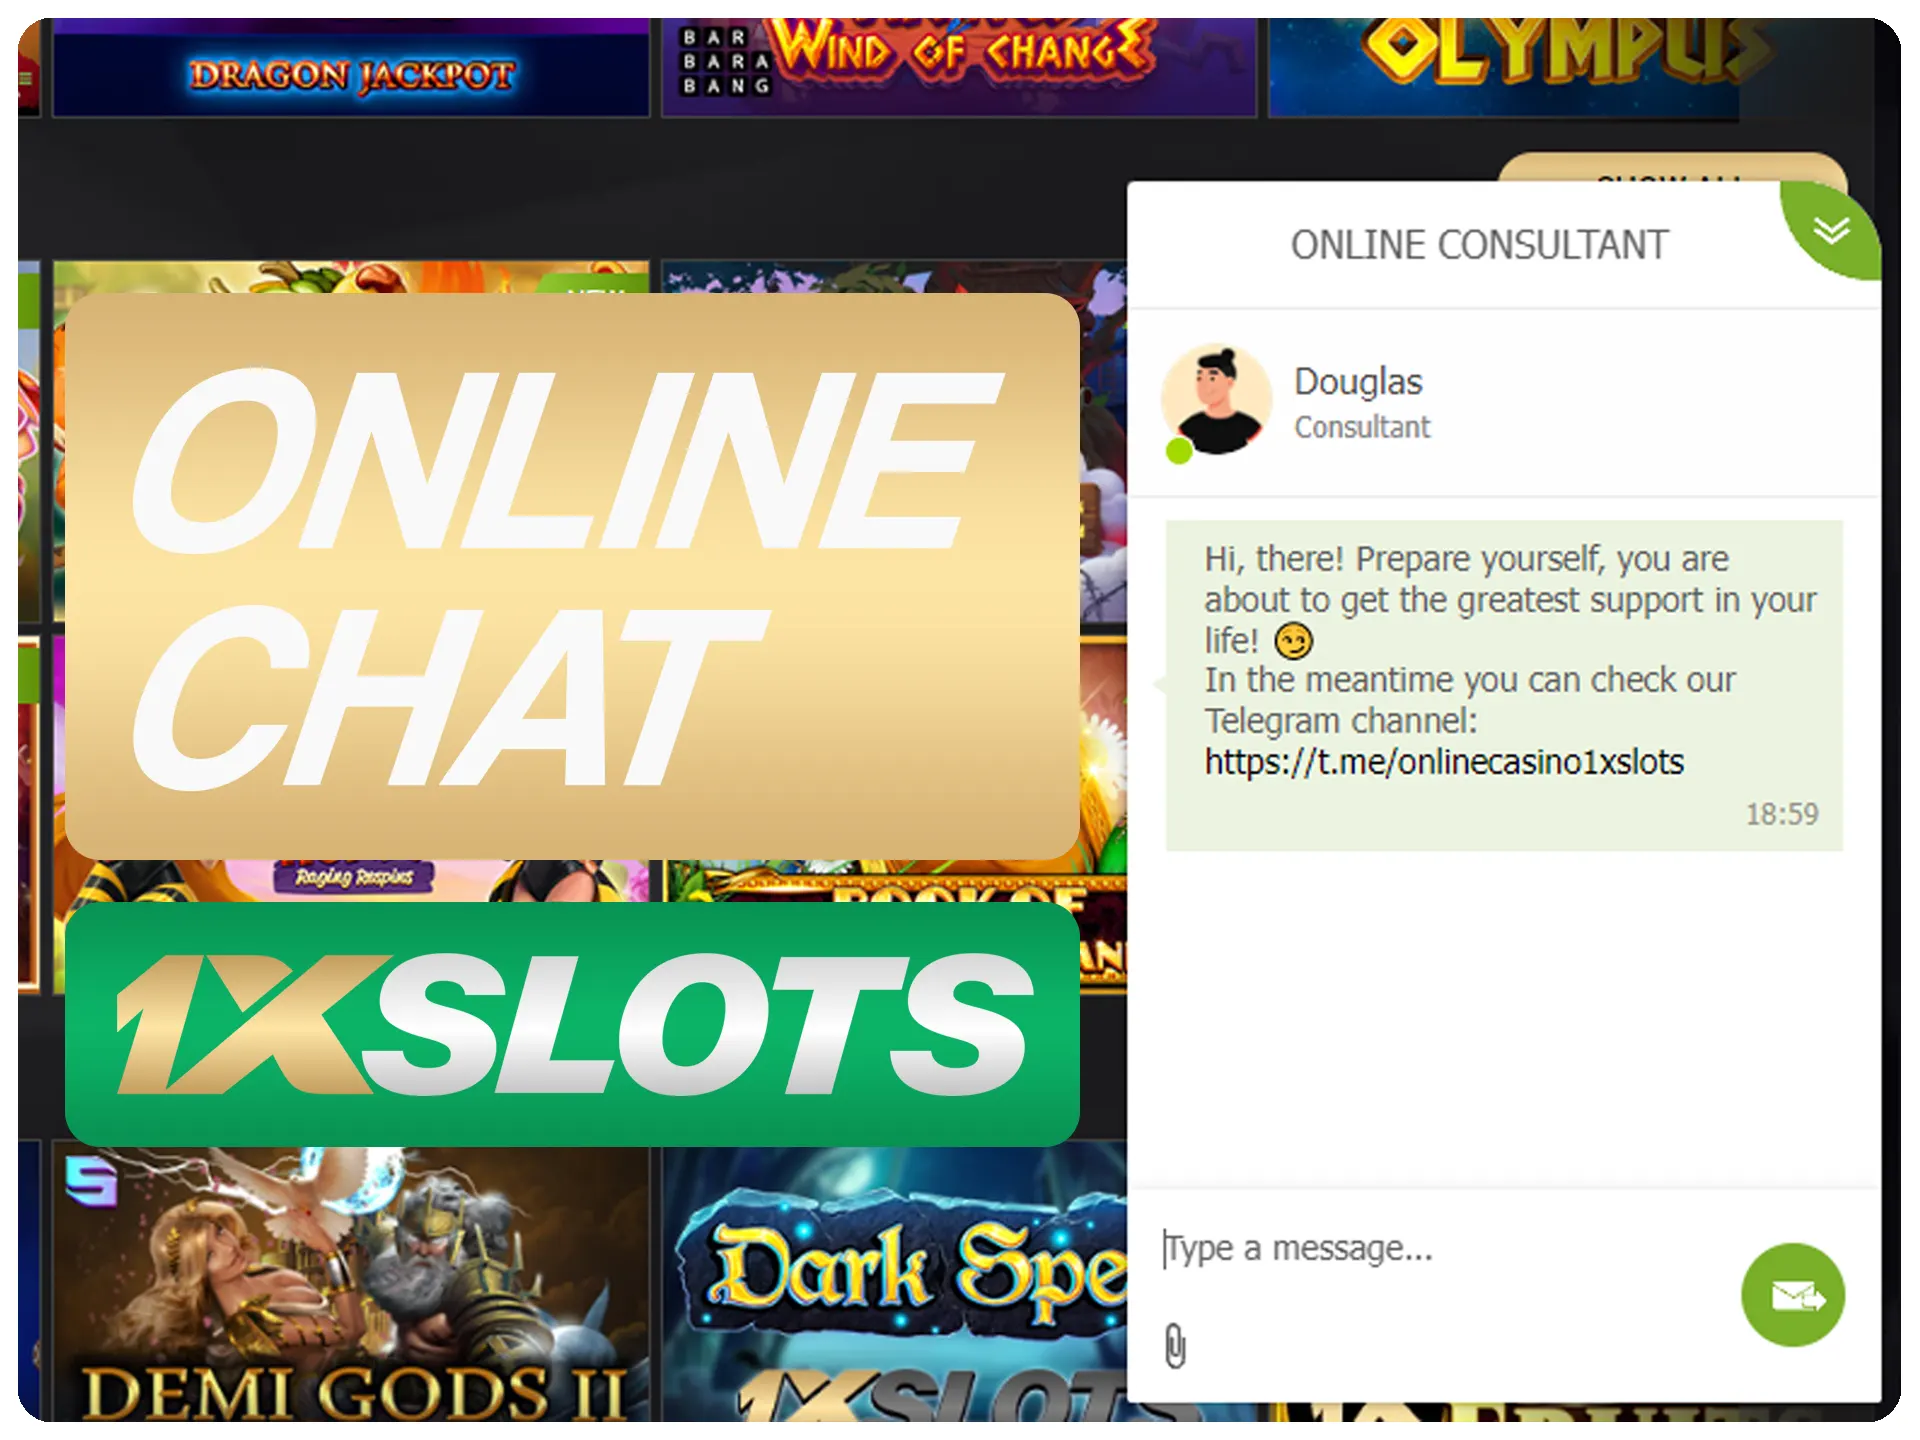 Chat with to 1xSlots staff online.